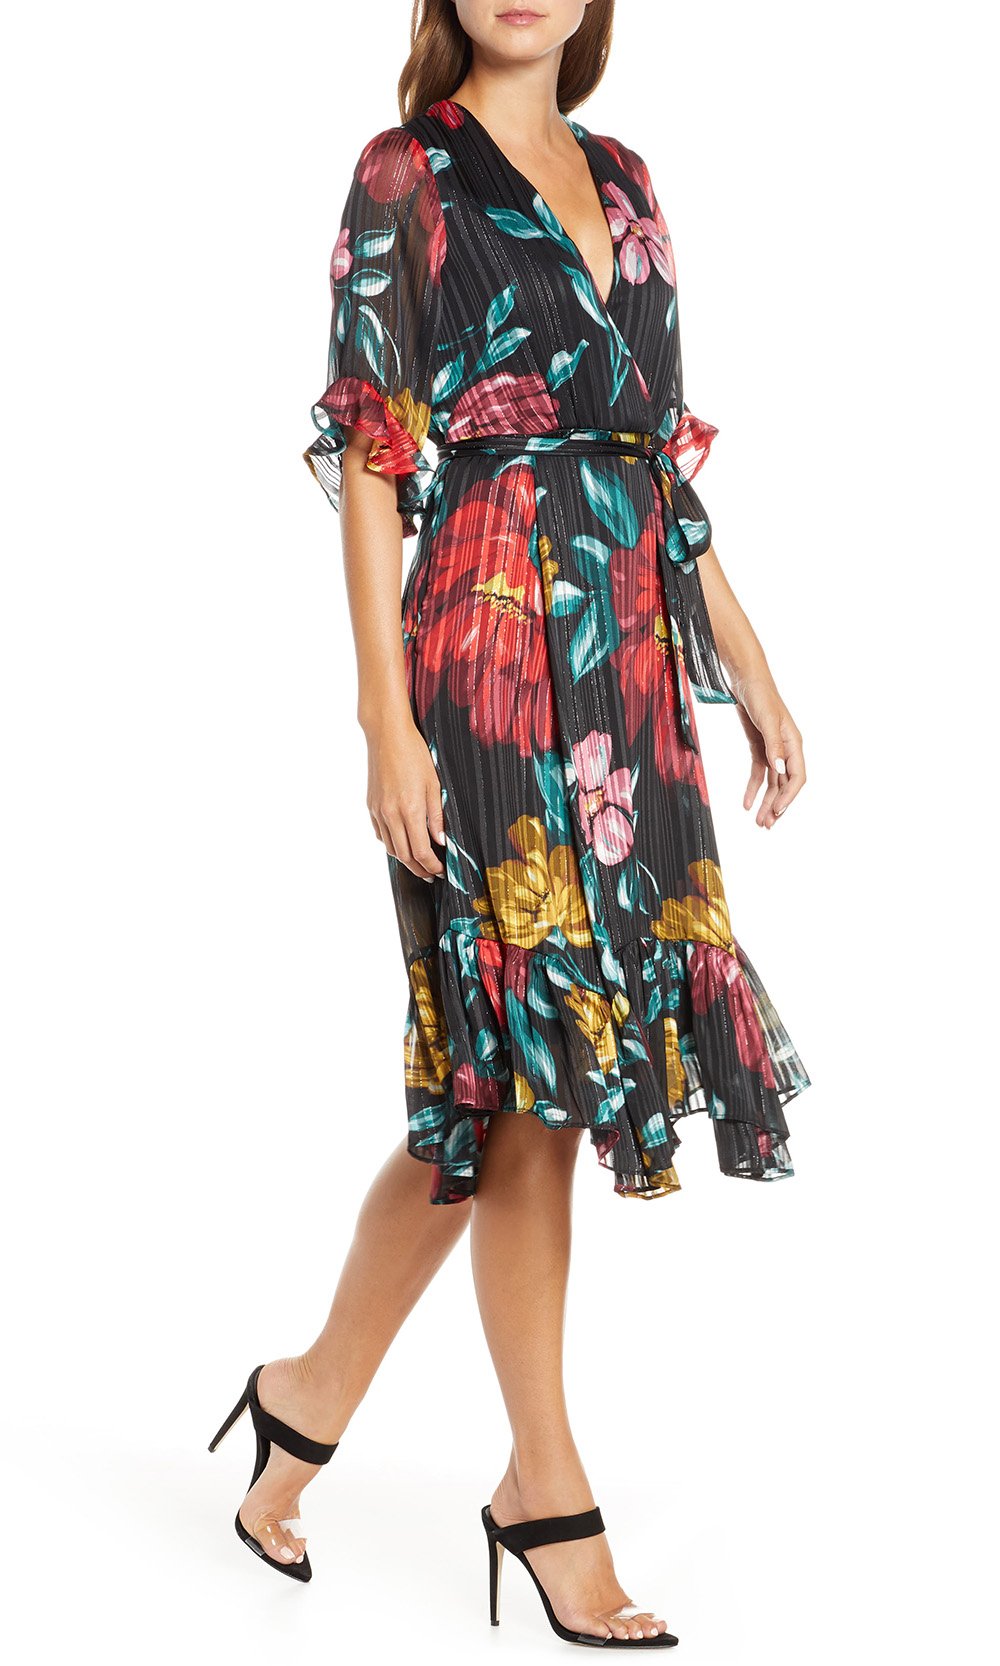 Maison Tara - 91125M Tea Length Floral Metallic Wrap Style Dress In Floral and Multi-Color